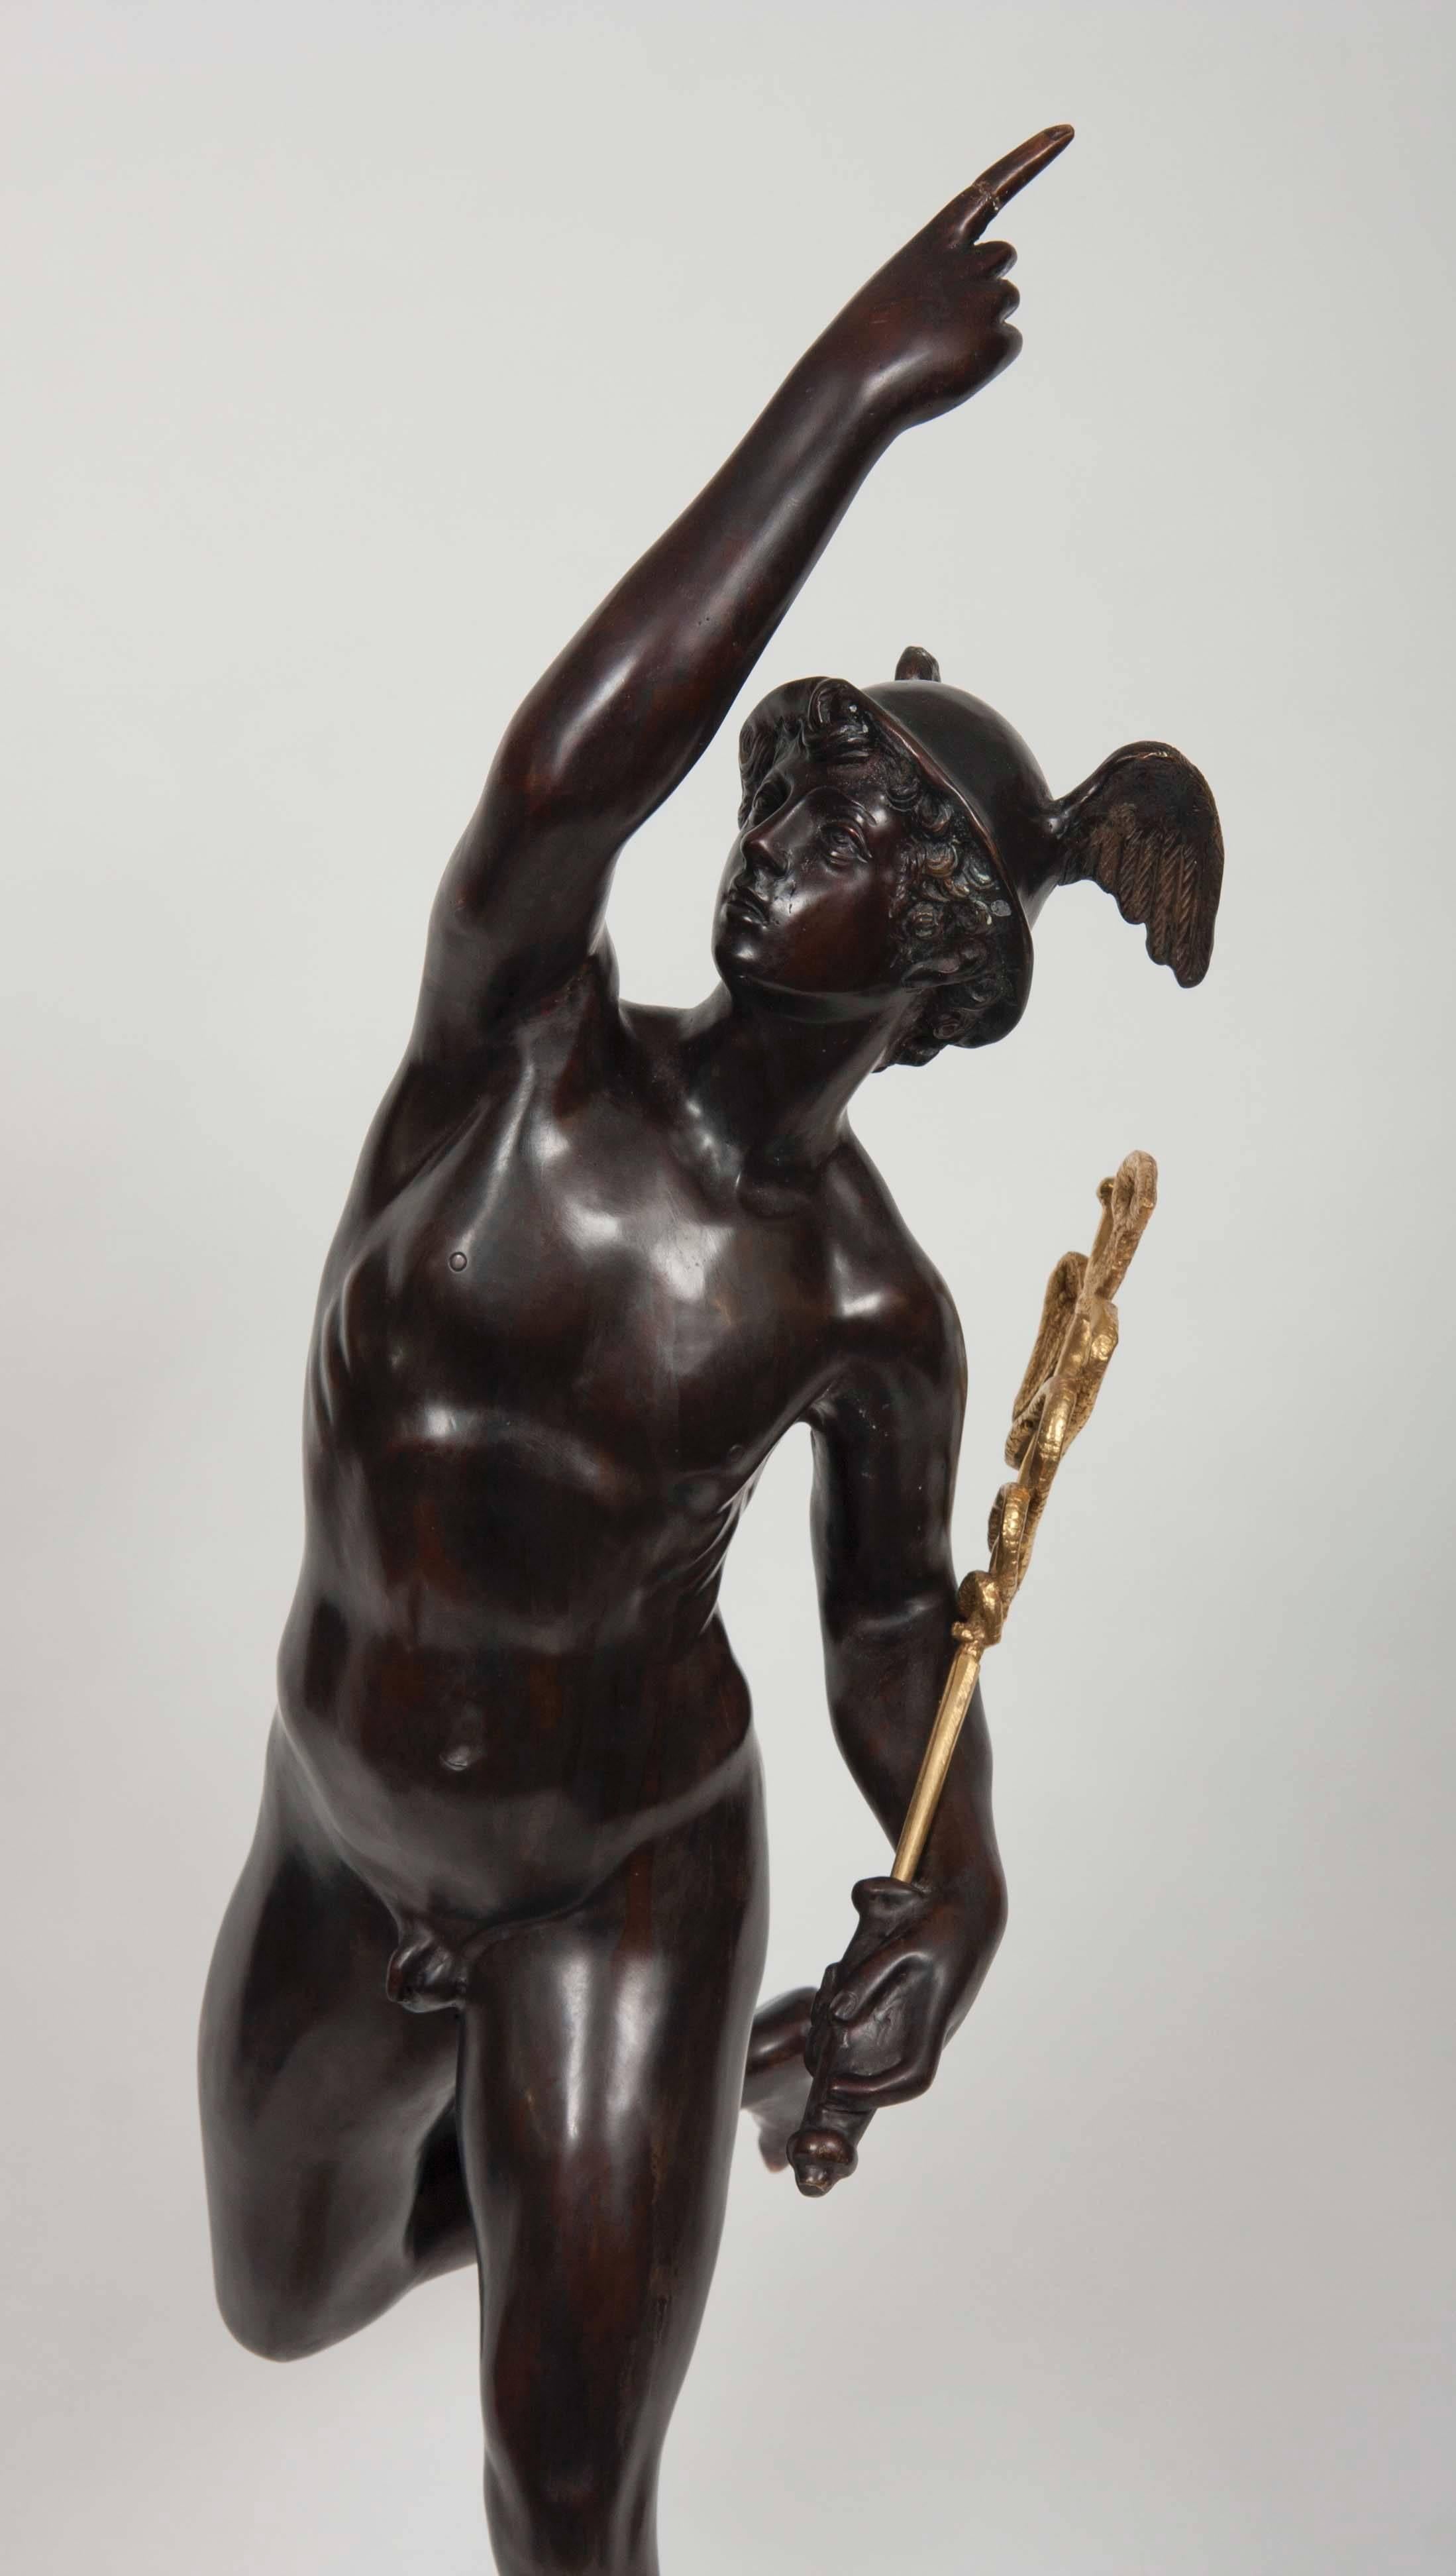 Italian patinated and gilt bronze figure of Mercury, after Giambologna. 

Literature
Ch. Avery, Giambologna 1529-1608. Sculptor to the Medici, cat. exp., Londres, 1978, pp. 85, n° 34.

Notes
The first mention of a bronze of Mercury by